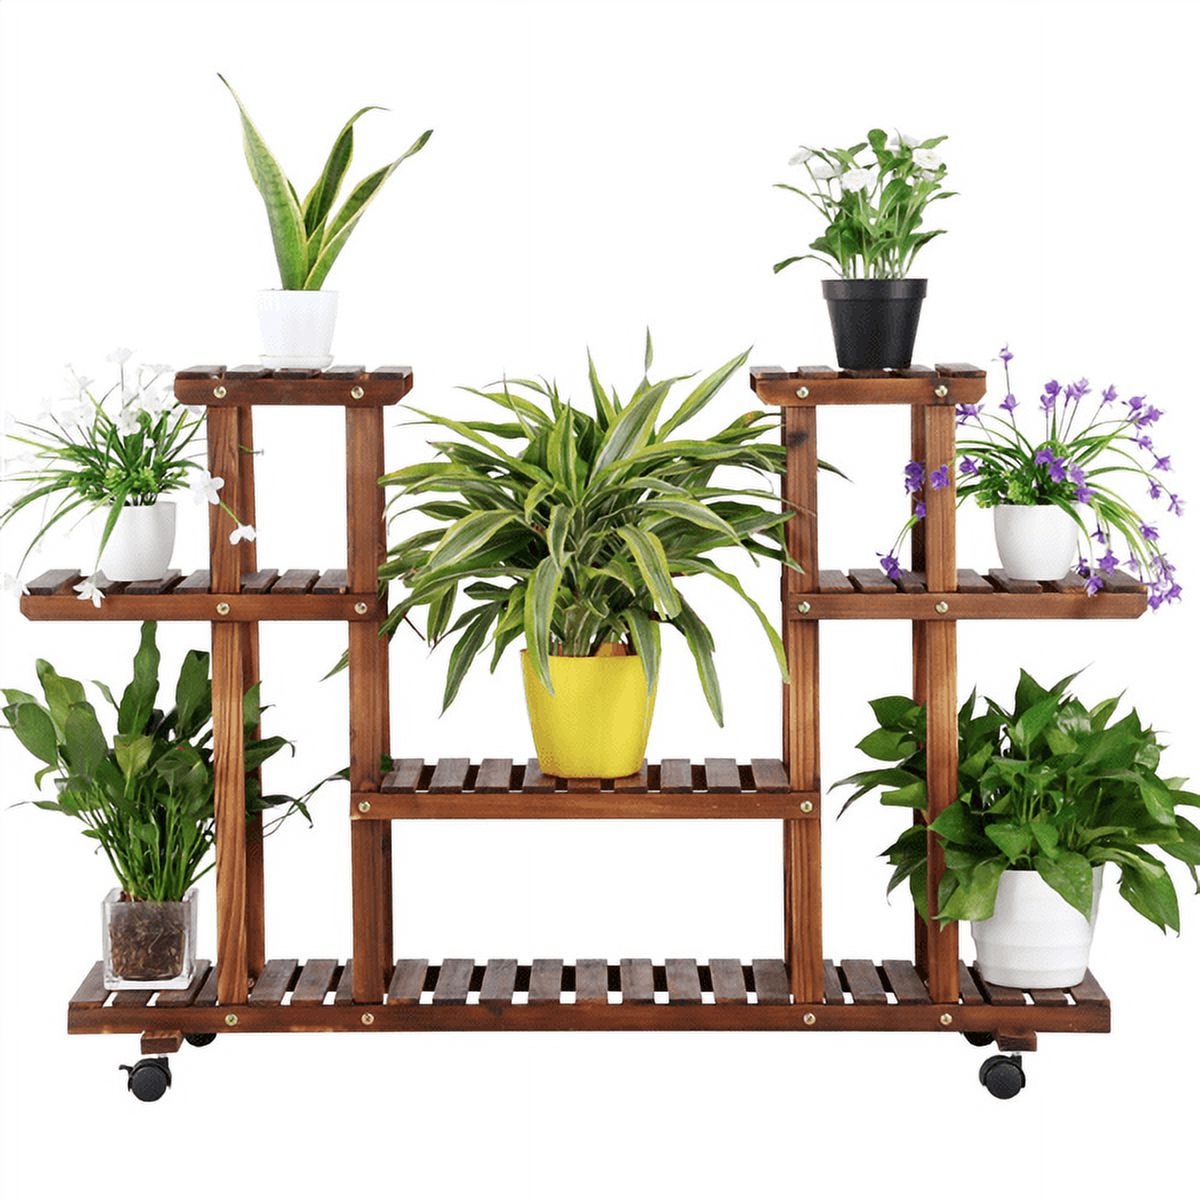 SmileMart 4-Tier 6-Shelf Rolling Wooden Flower Display Stand for Indoors or Outdoors - image 1 of 6